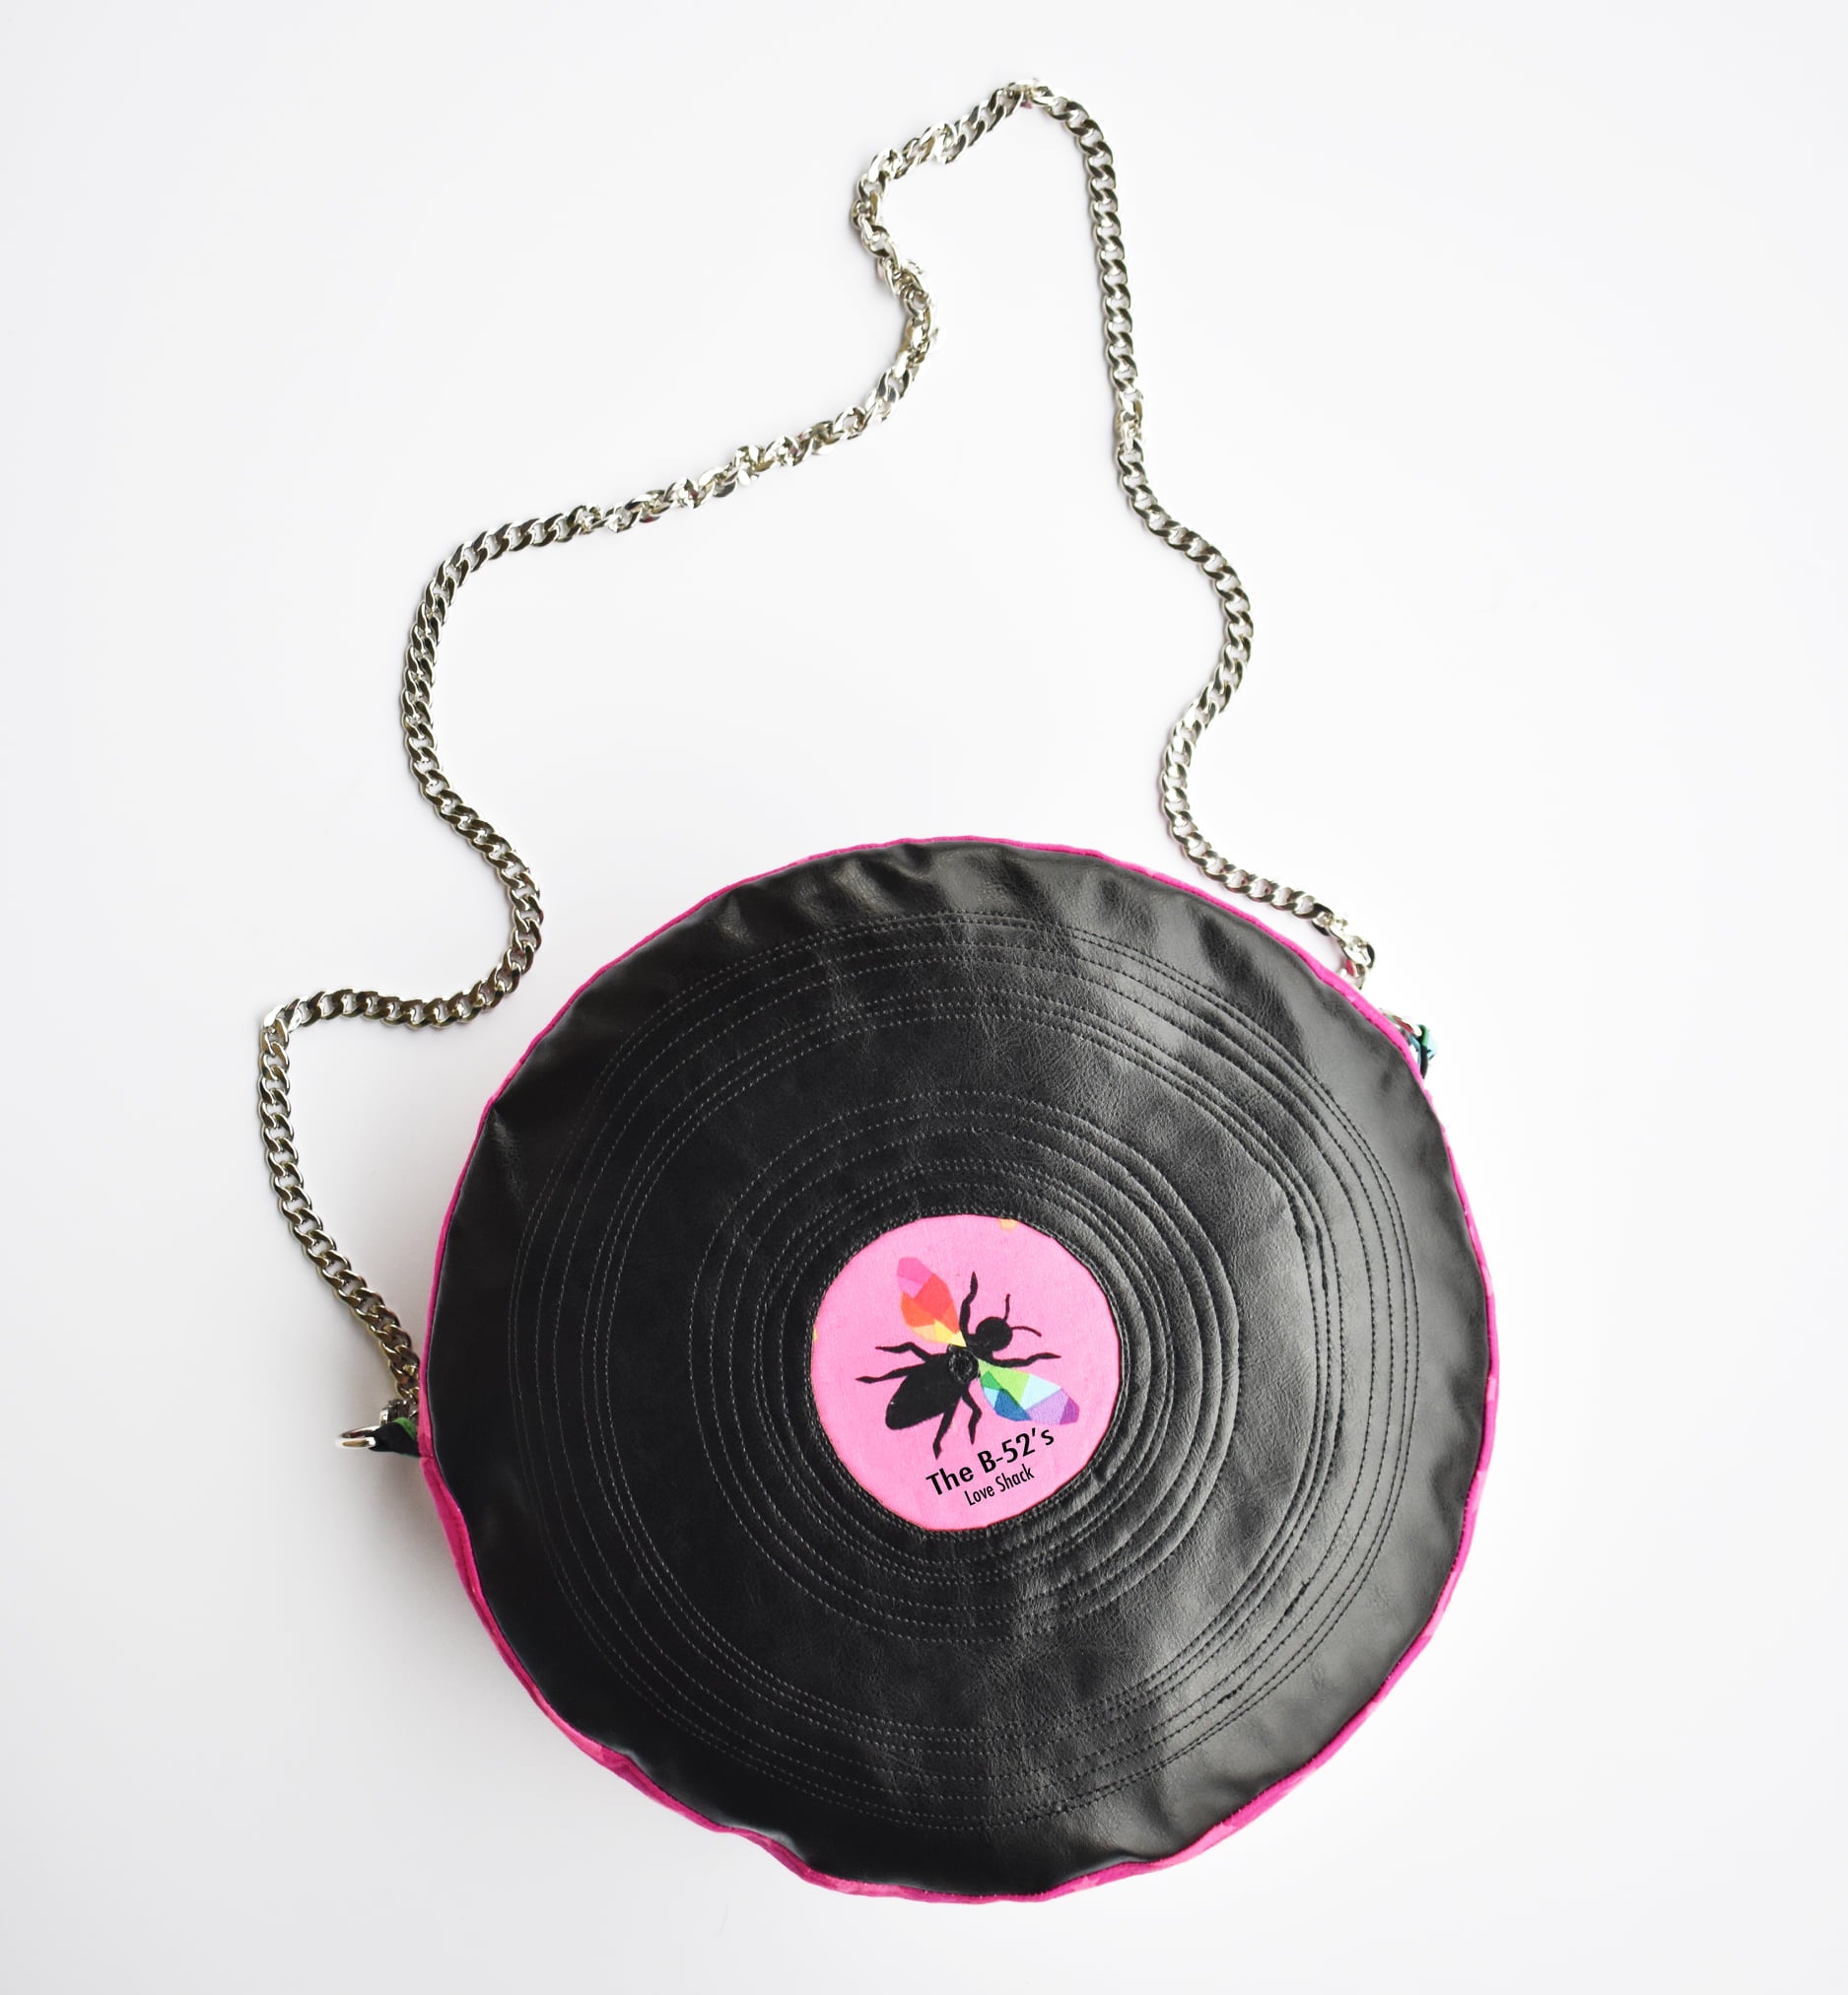 Vinyl Record tote bag, the ultimate must-have for record